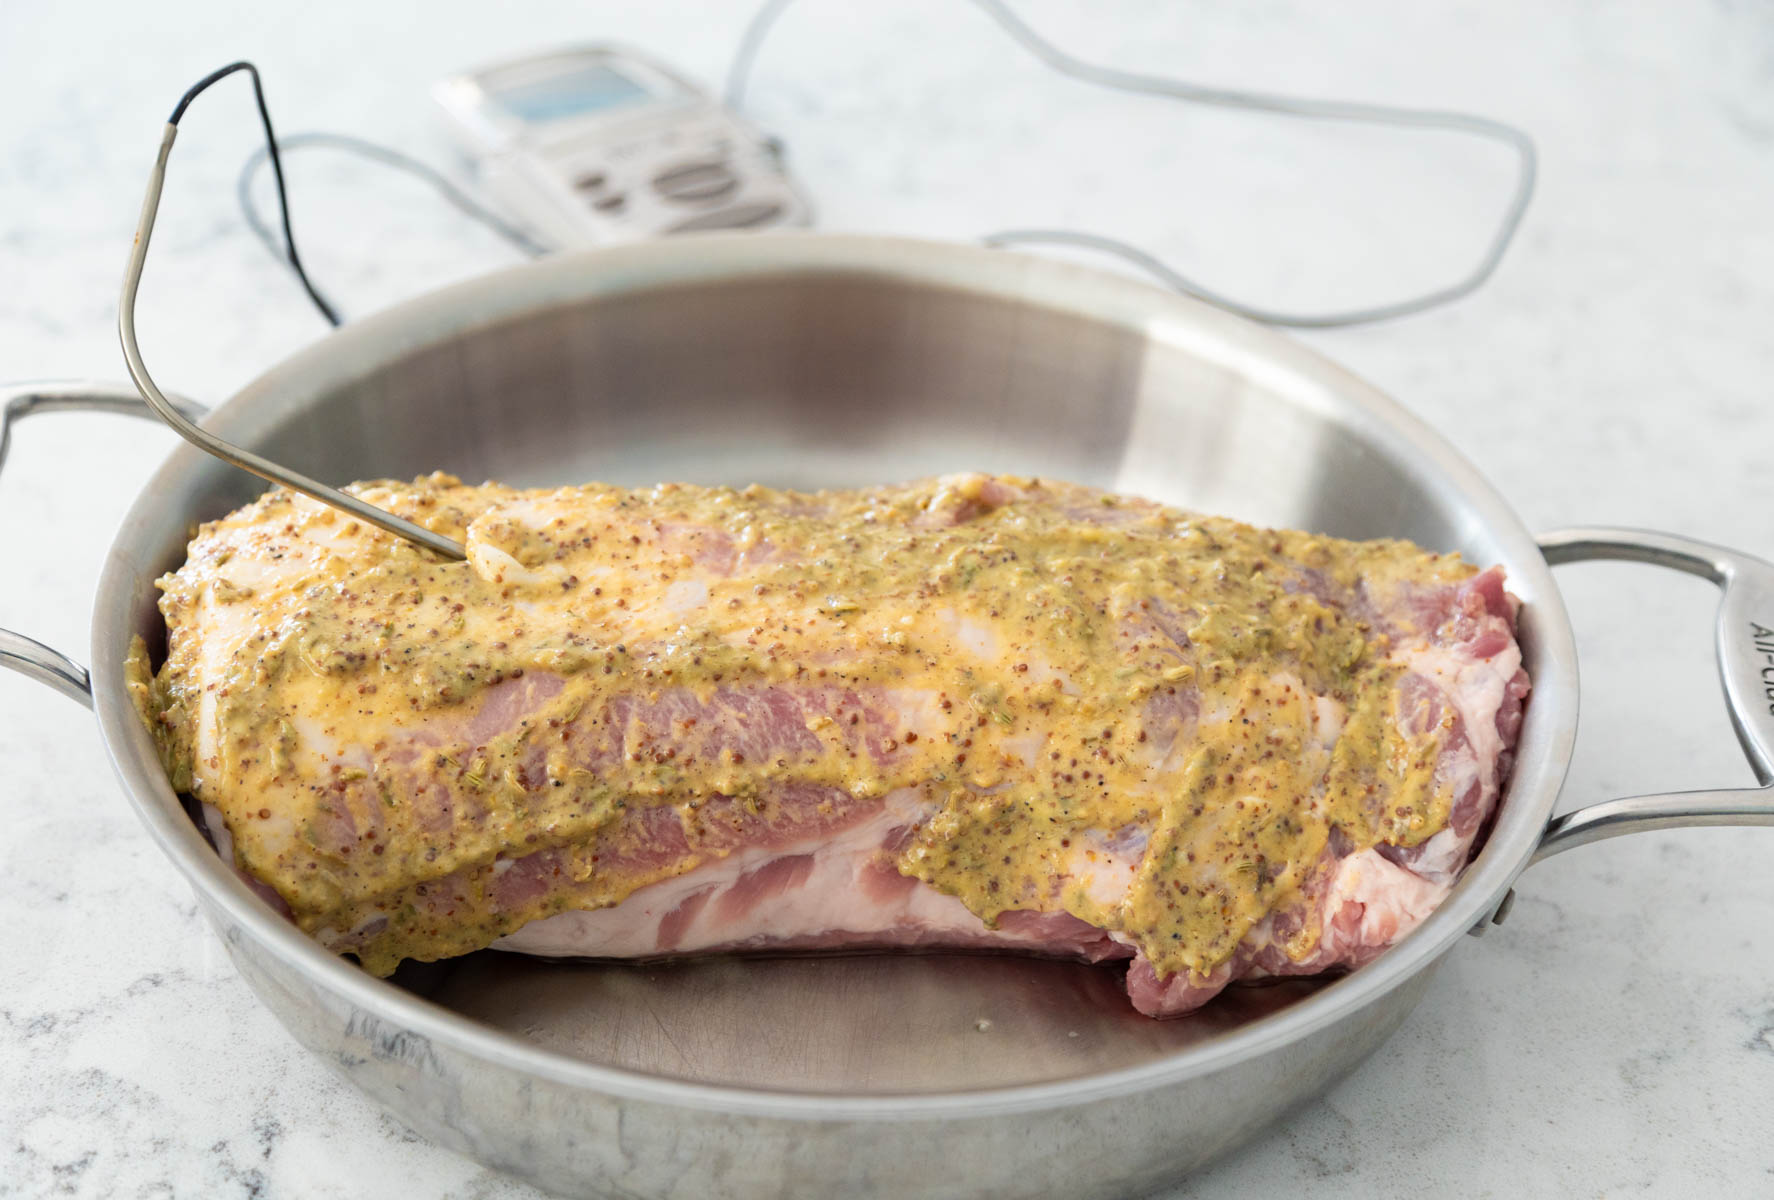 The pork loin is in a large saute pan and has been rubbed down with a mustard glaze.